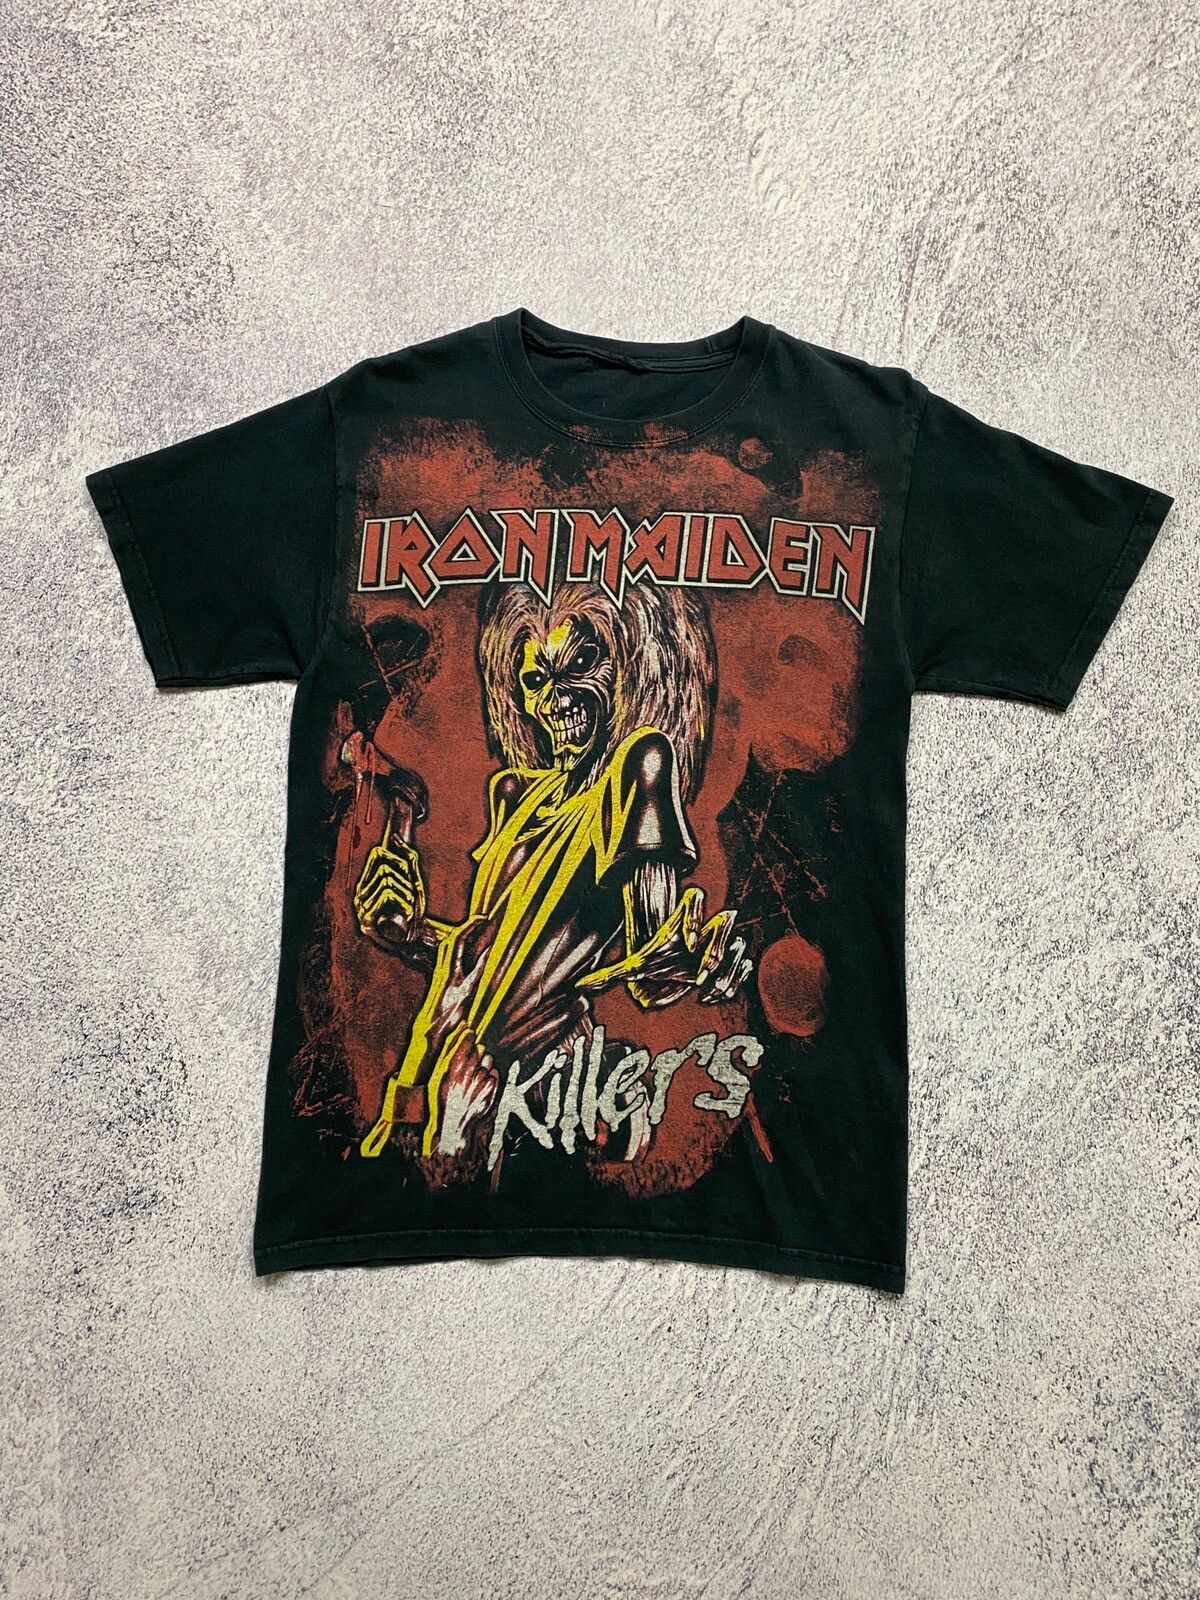 Pre-owned Band Tees X Iron Maiden Vintage Iron Maiden Killers Logo Band Tee 2000s T Shirt In Black